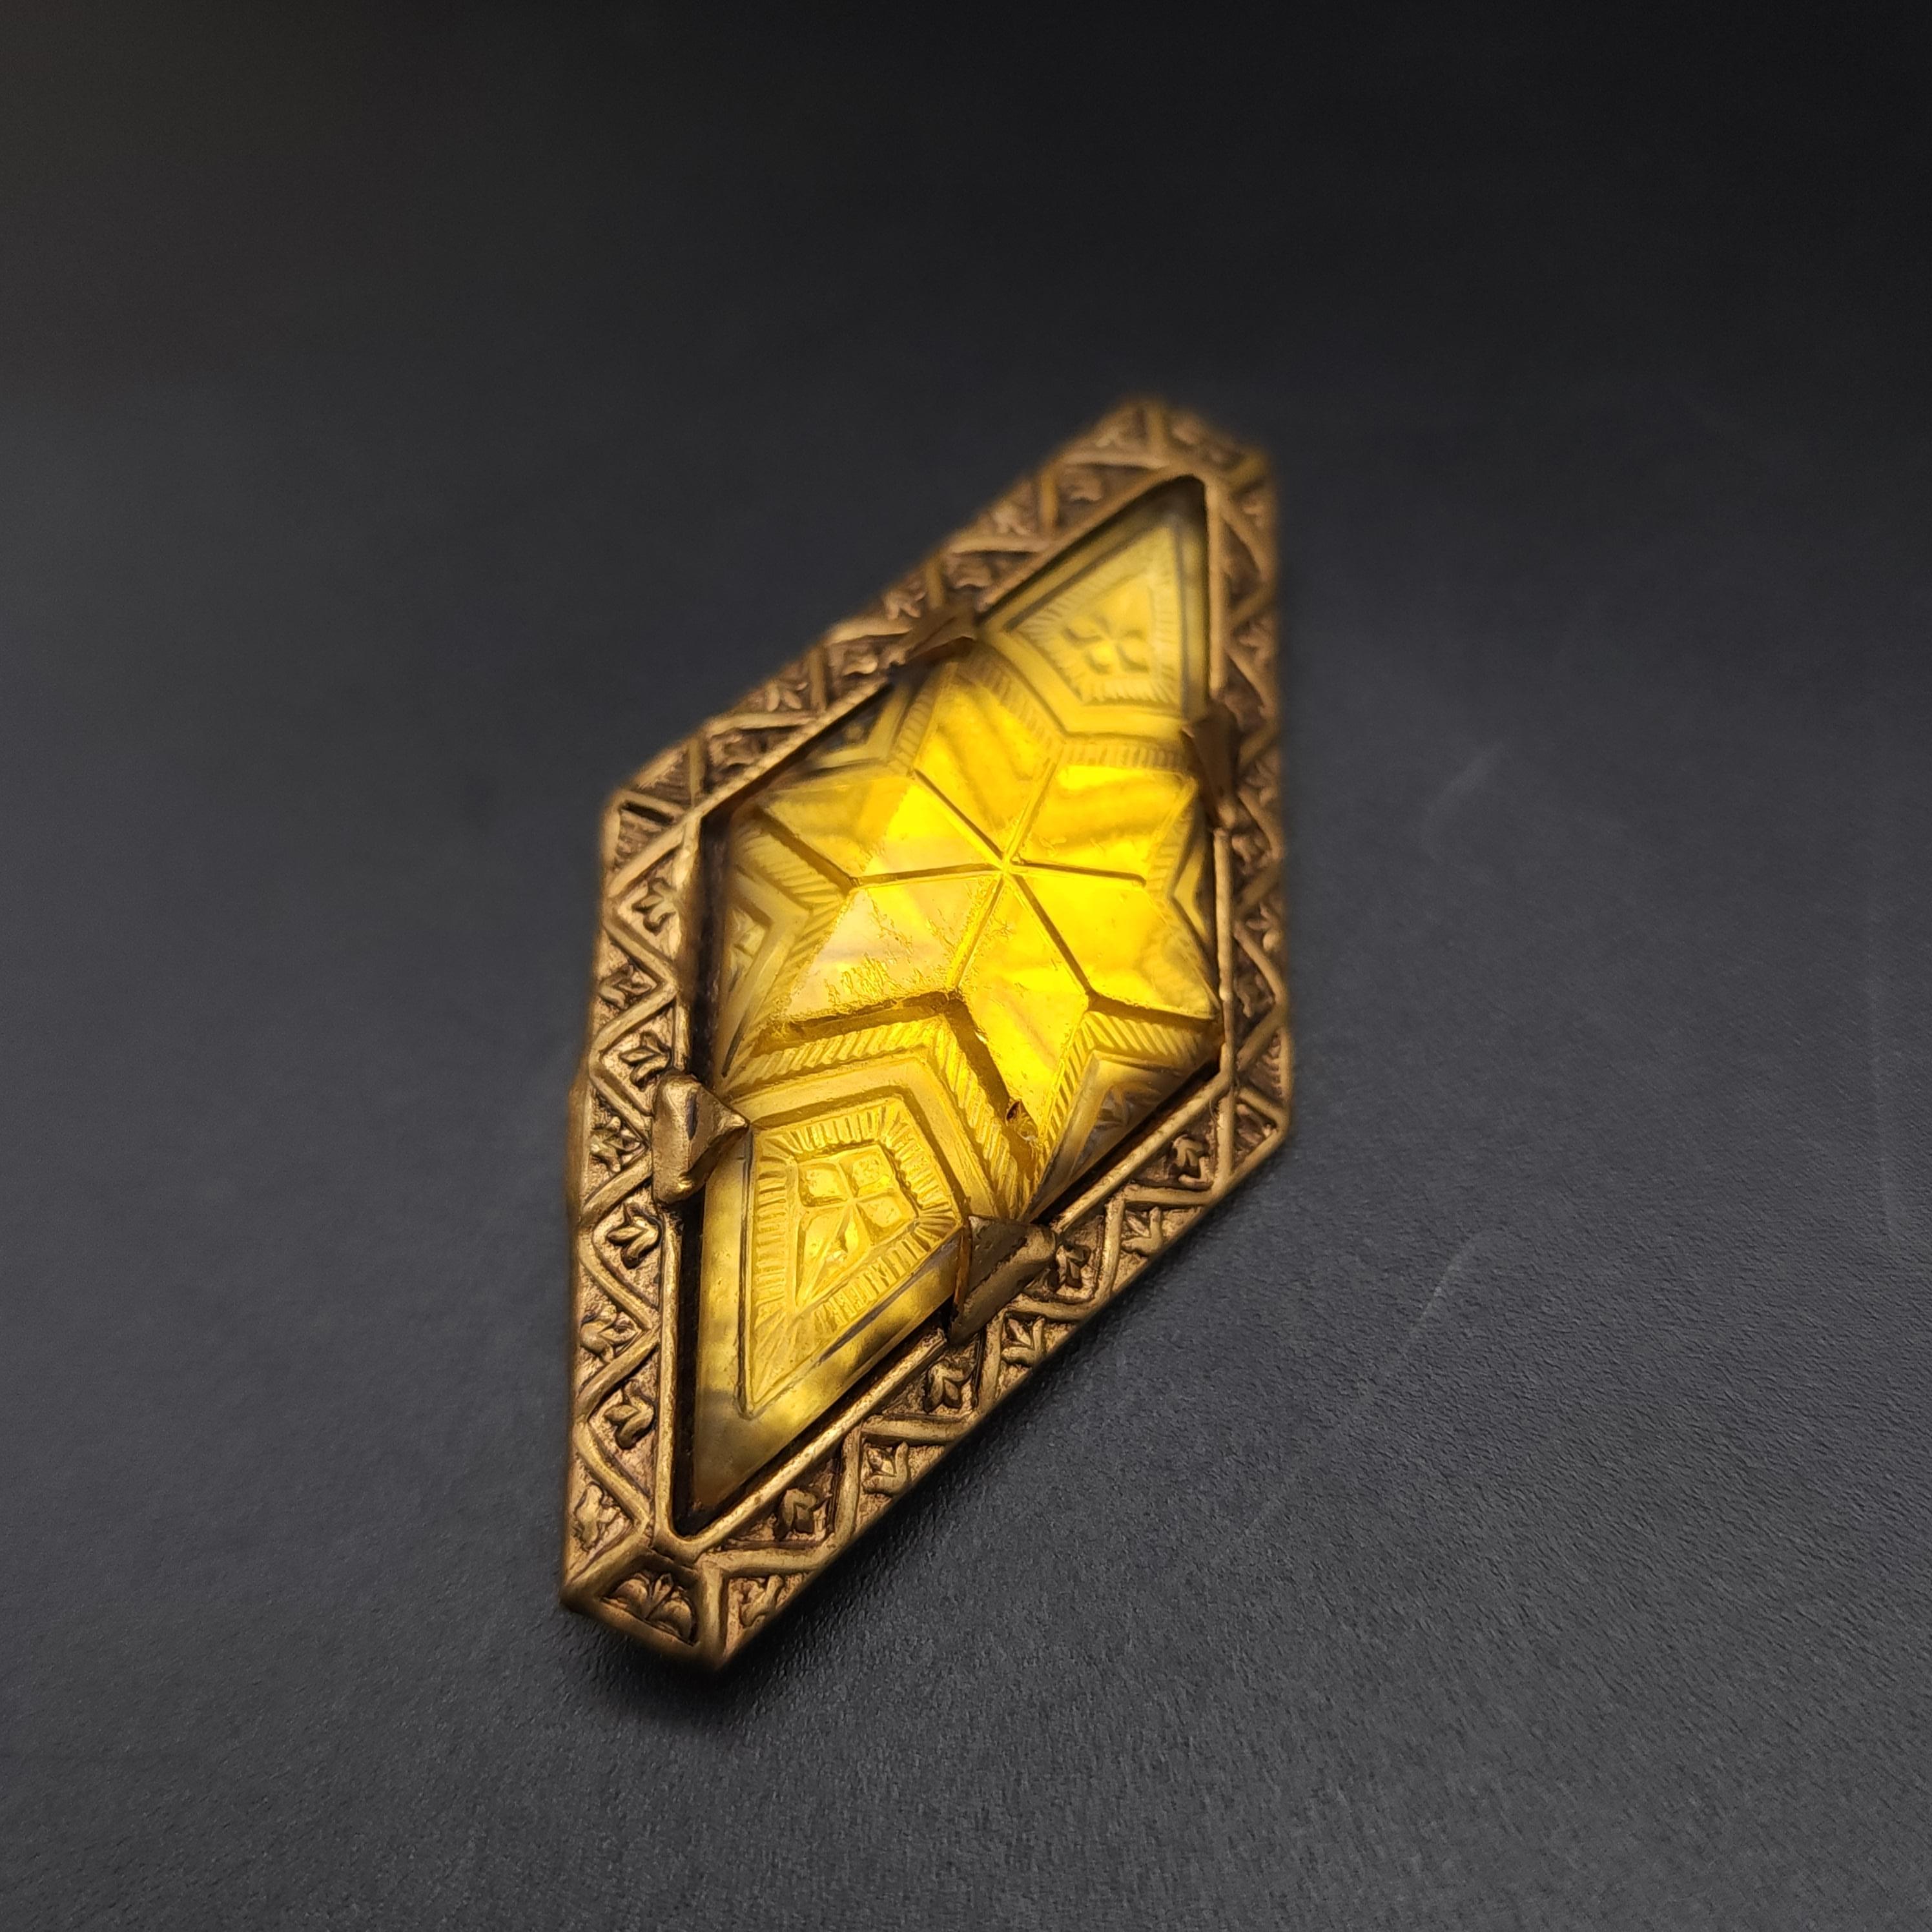 Size: 2 1/8 x 1 1/8 inches

Elevate your ensemble with this Art Deco vintage pin, featuring a gold-tone frame that exudes classic elegance. At its heart lies a dazzling citrine-colored crystal, prong-set and intricately carved with geometric designs